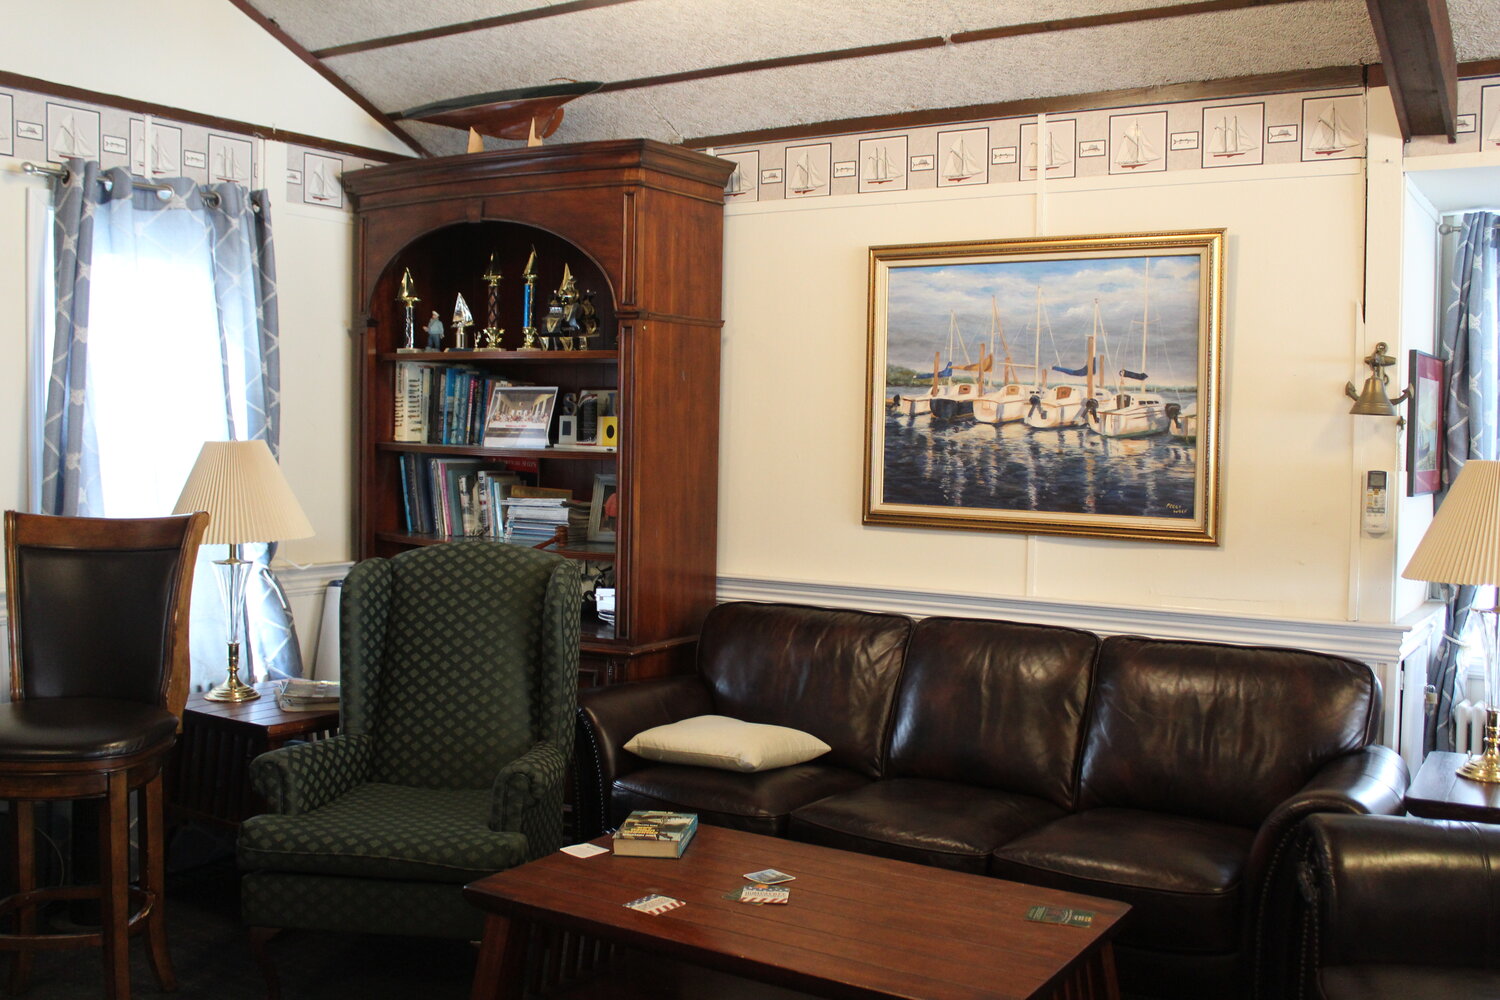 A view inside the Hempstead Bay Sailing Club features books, medals, and lounging space for club members.